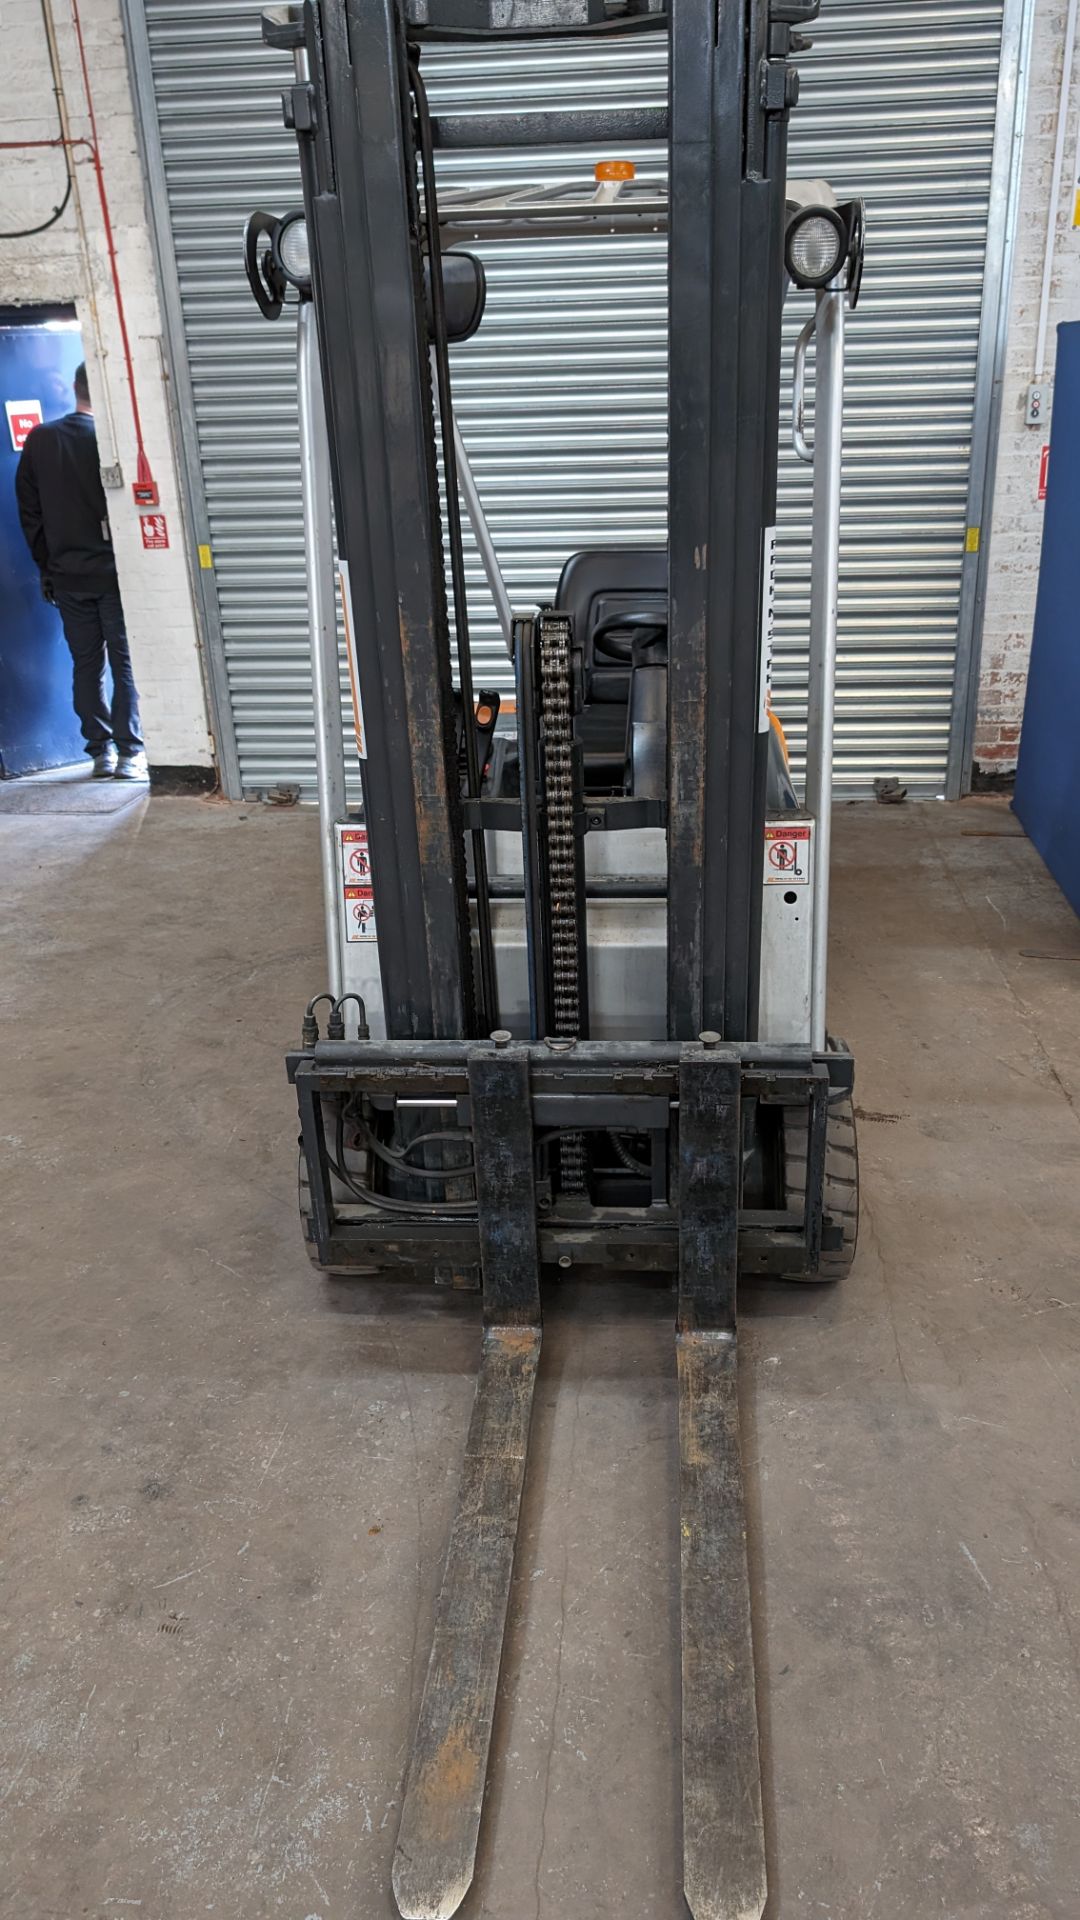 Still model RX-5015 3-wheel electric forklift truck with sideshift, 1.5 tonne capacity, including St - Bild 5 aus 18